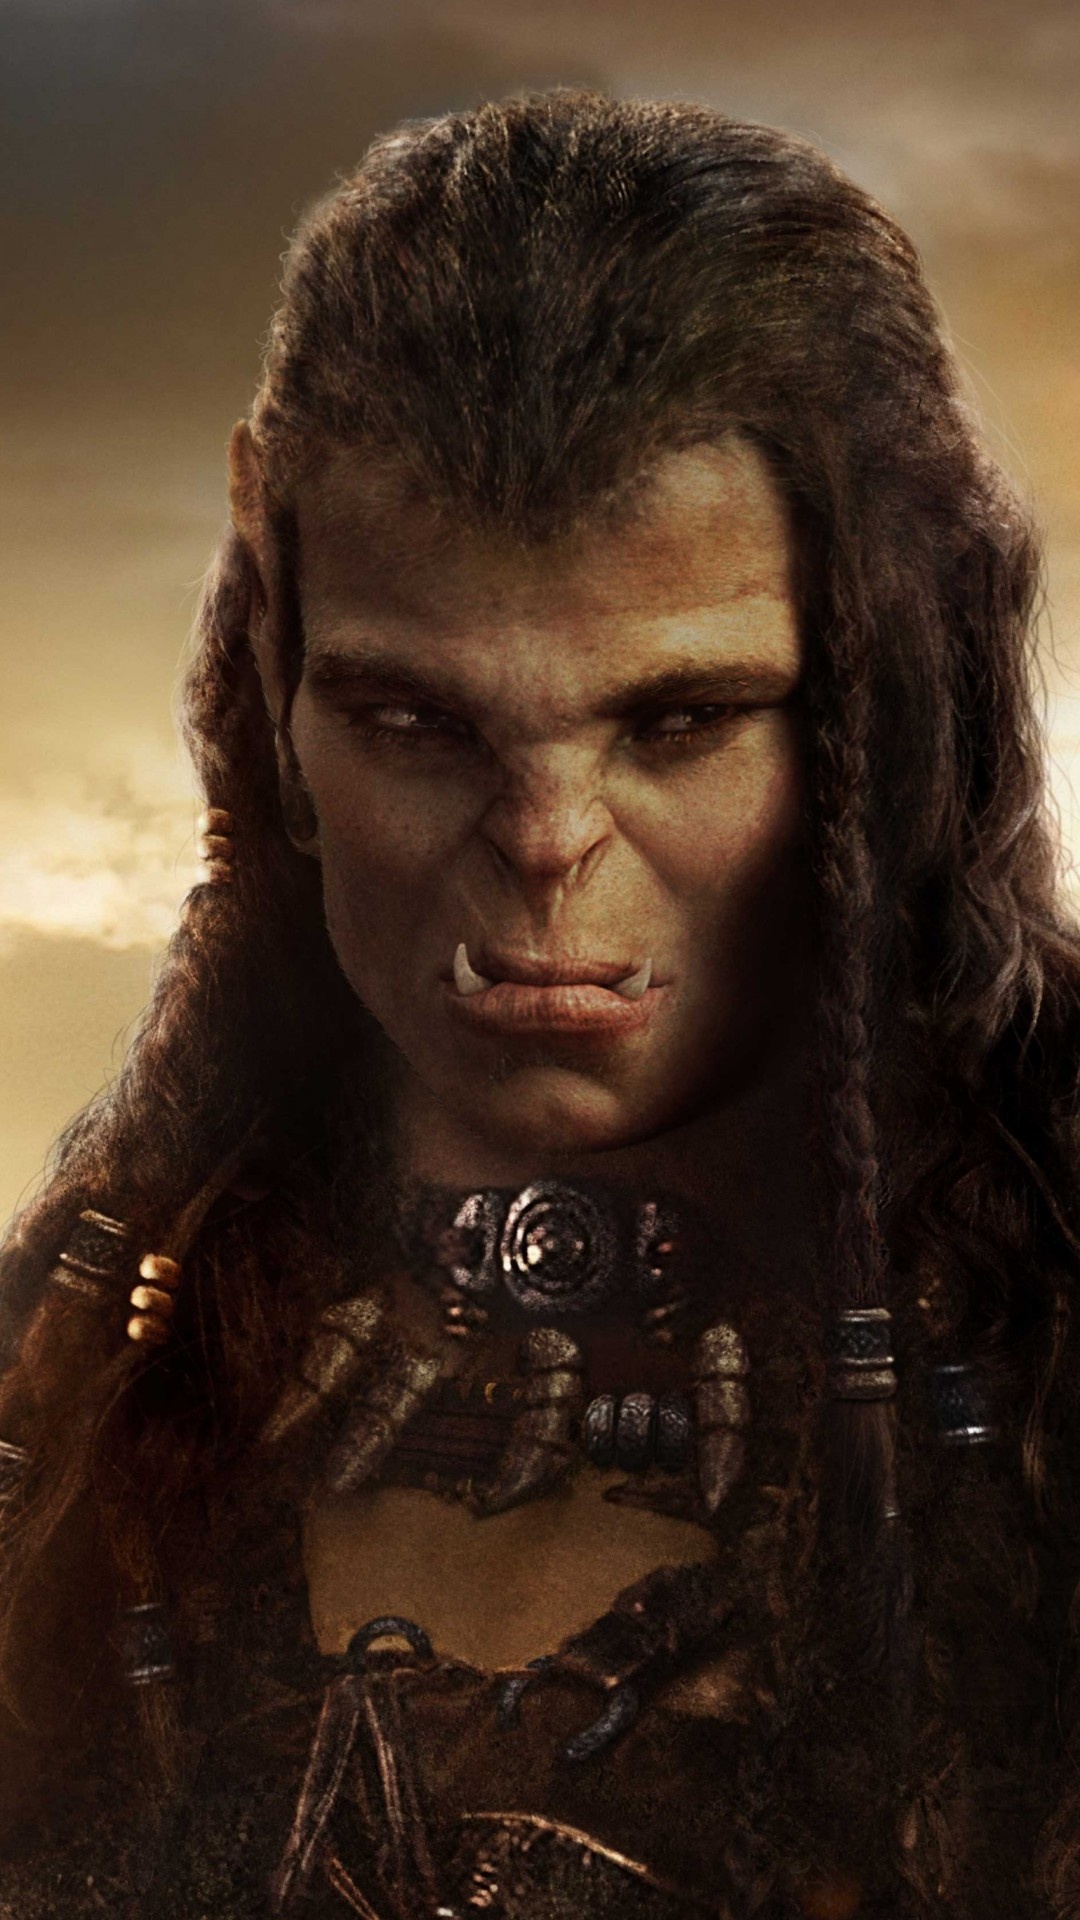 Warcraft (Movie): Anna Galvin as Draka, Durotan’s mate and the mother of Thrall. 1080x1920 Full HD Wallpaper.